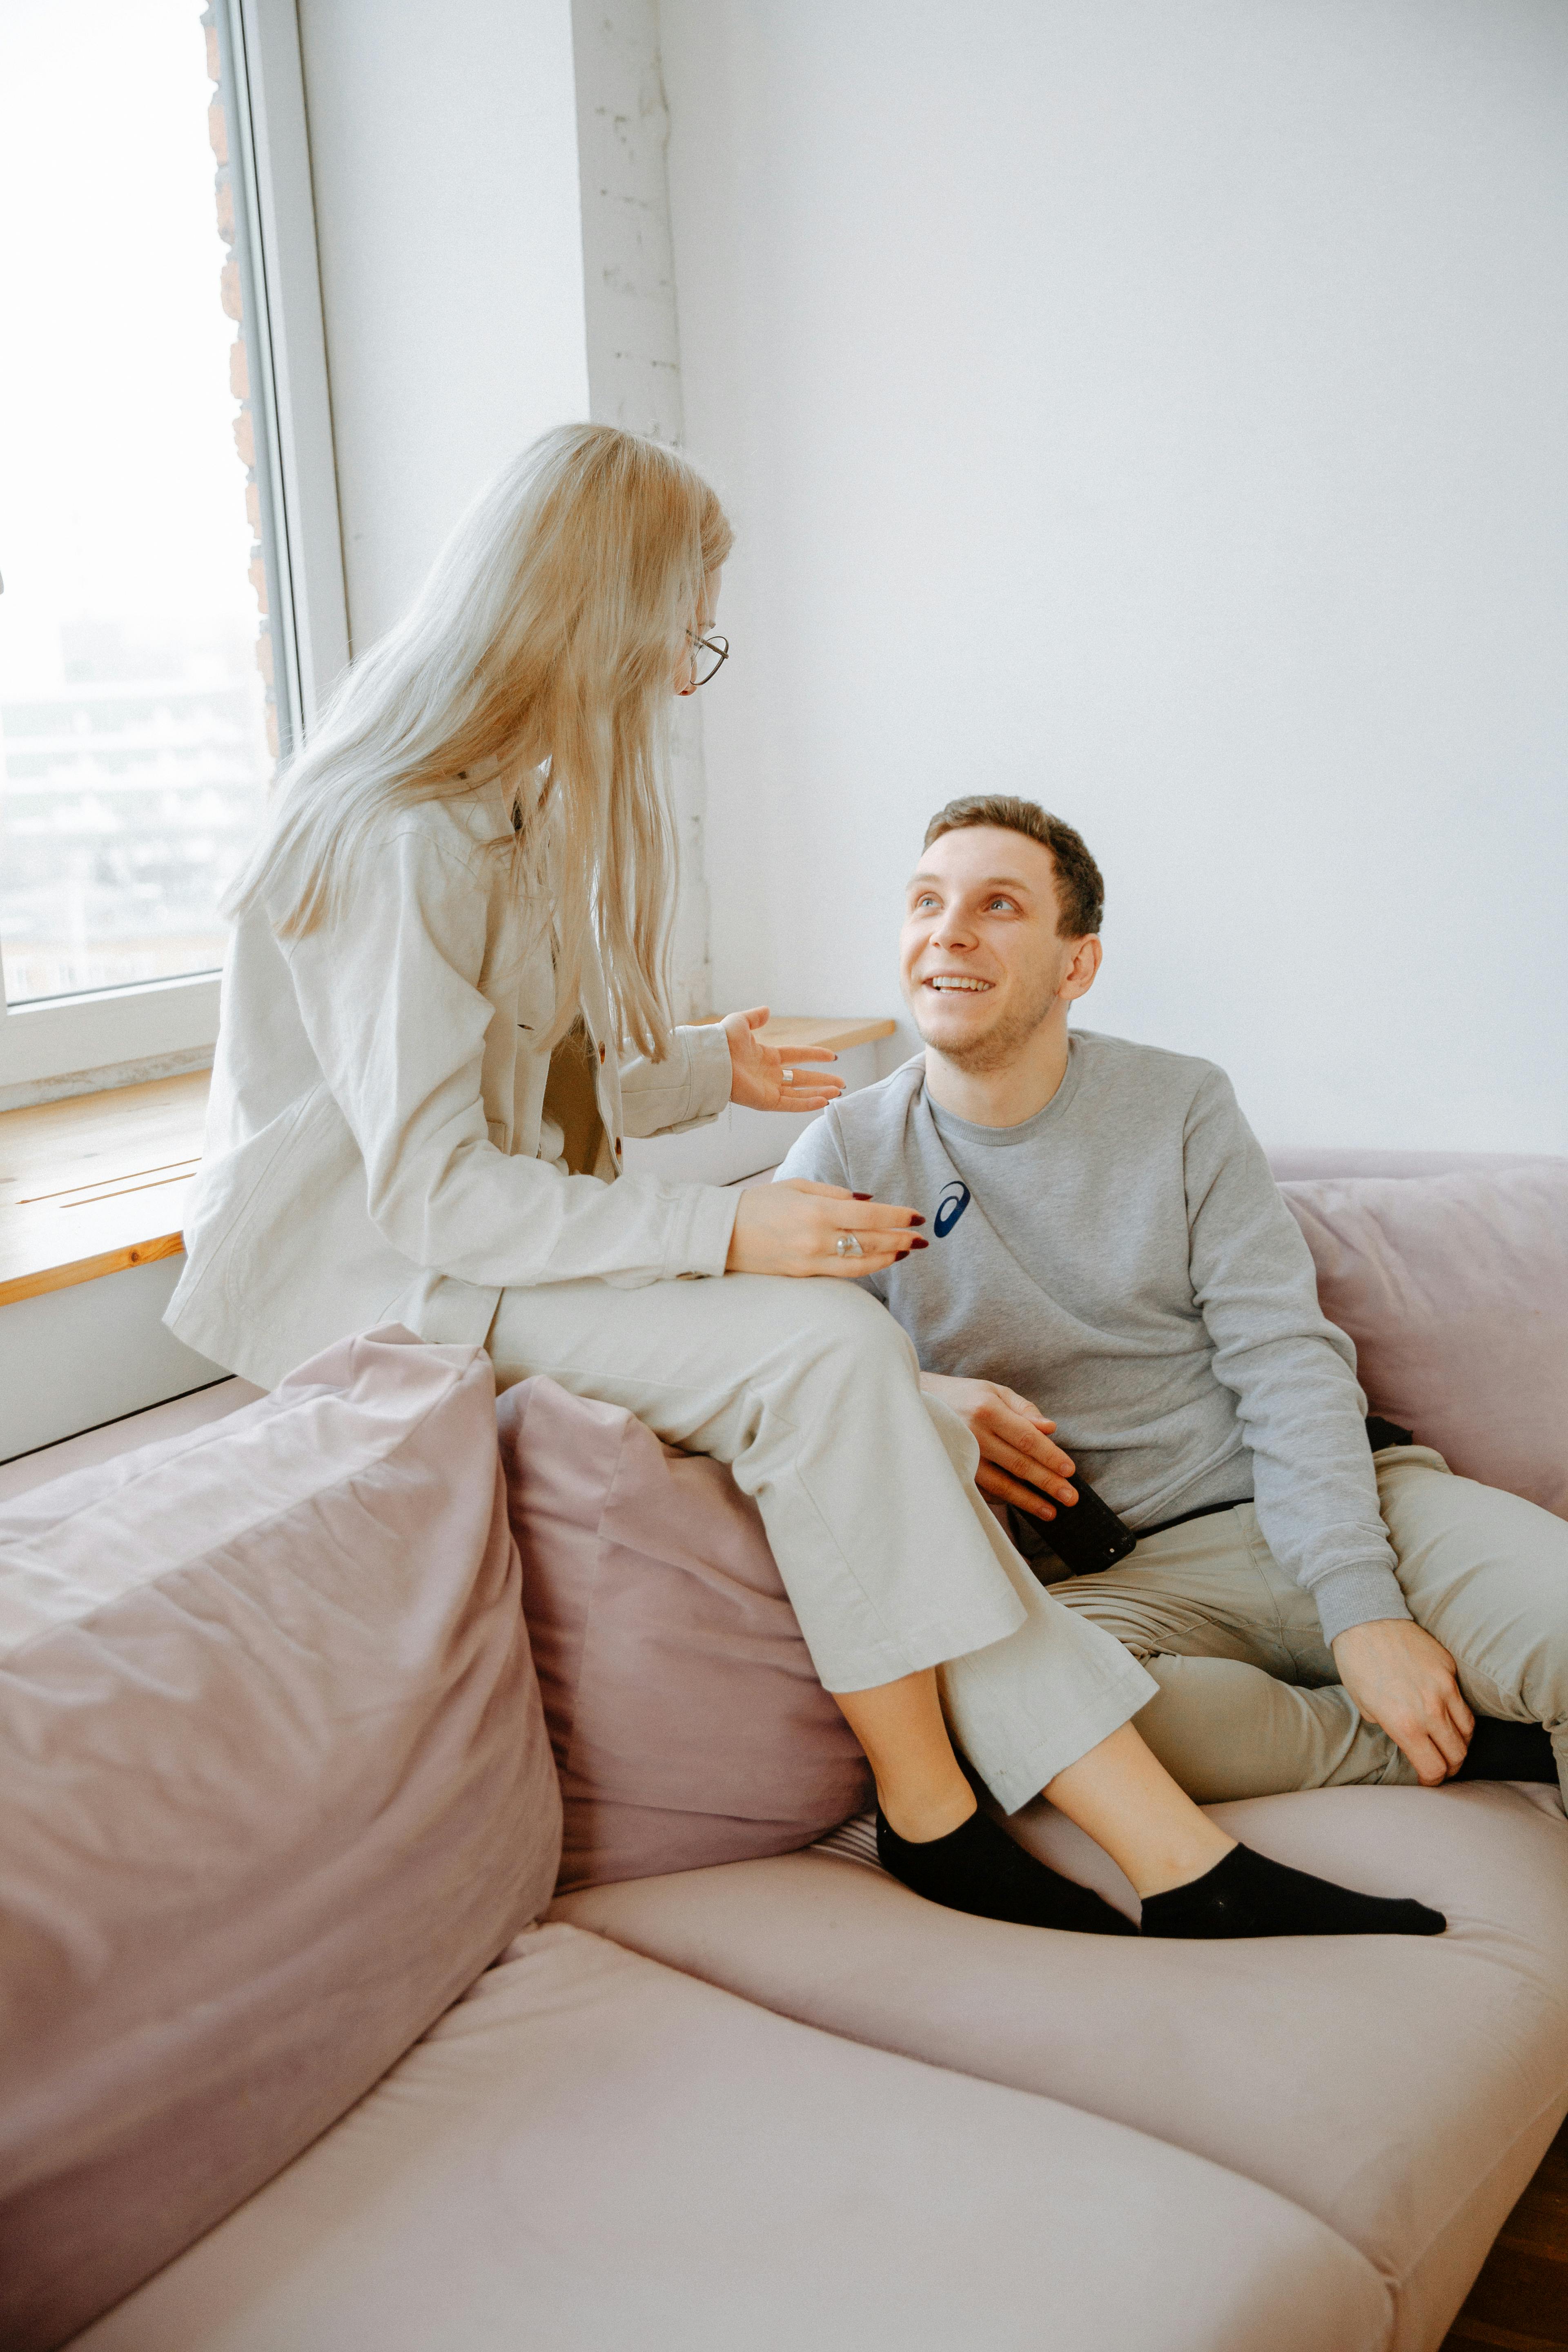 A couple talking while on a couch | Source: Pexels